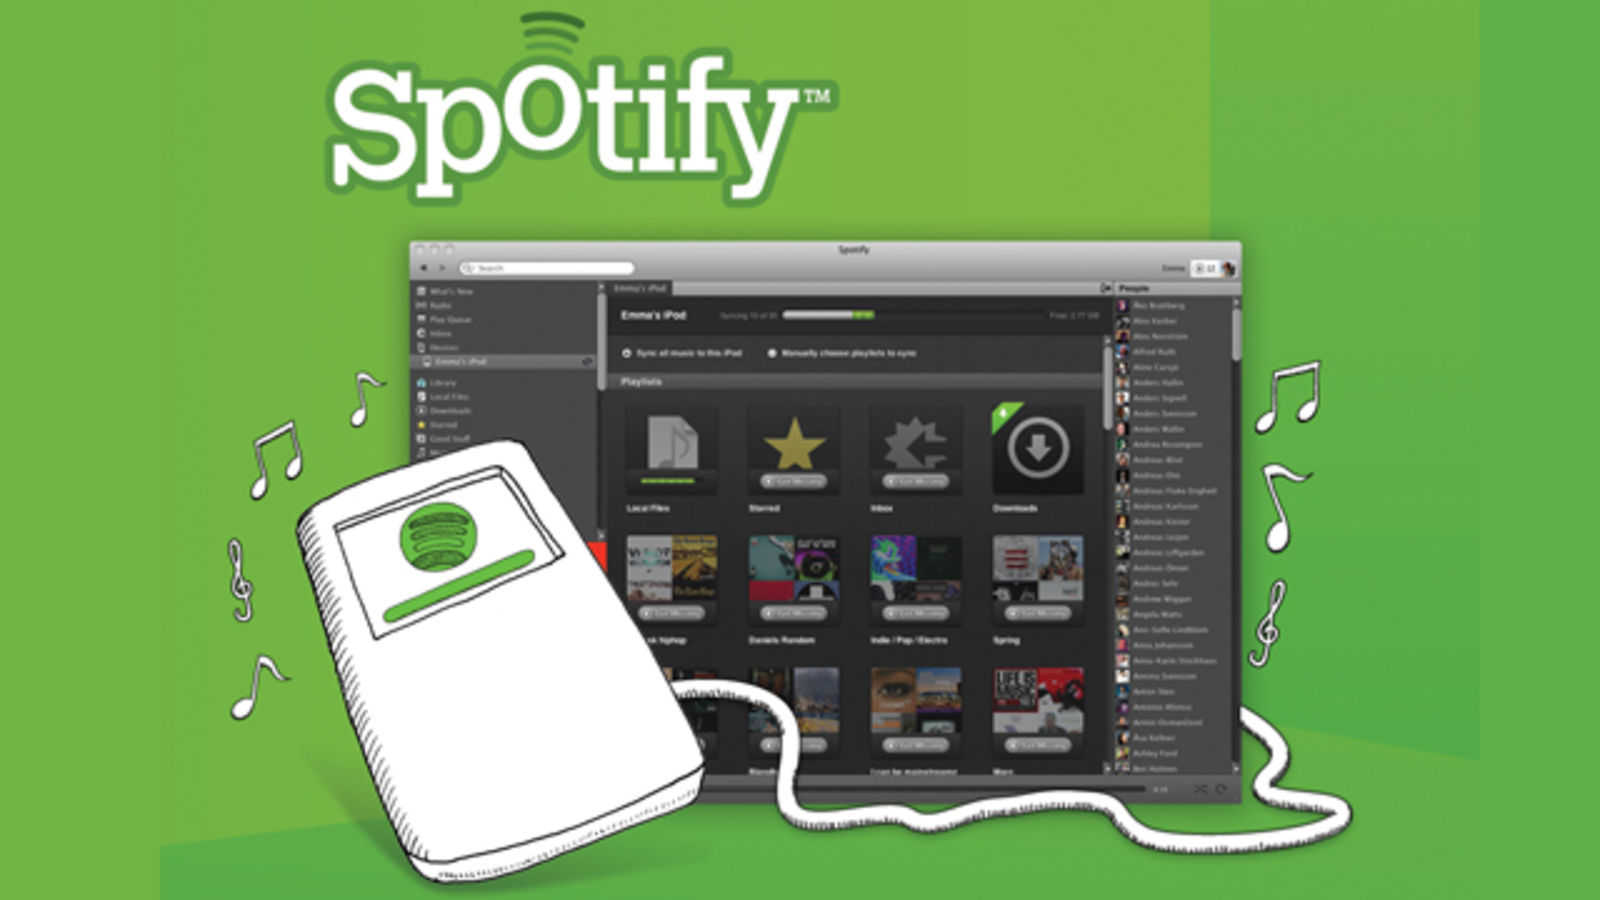 Spotify on ipod waiting to download ipod touch